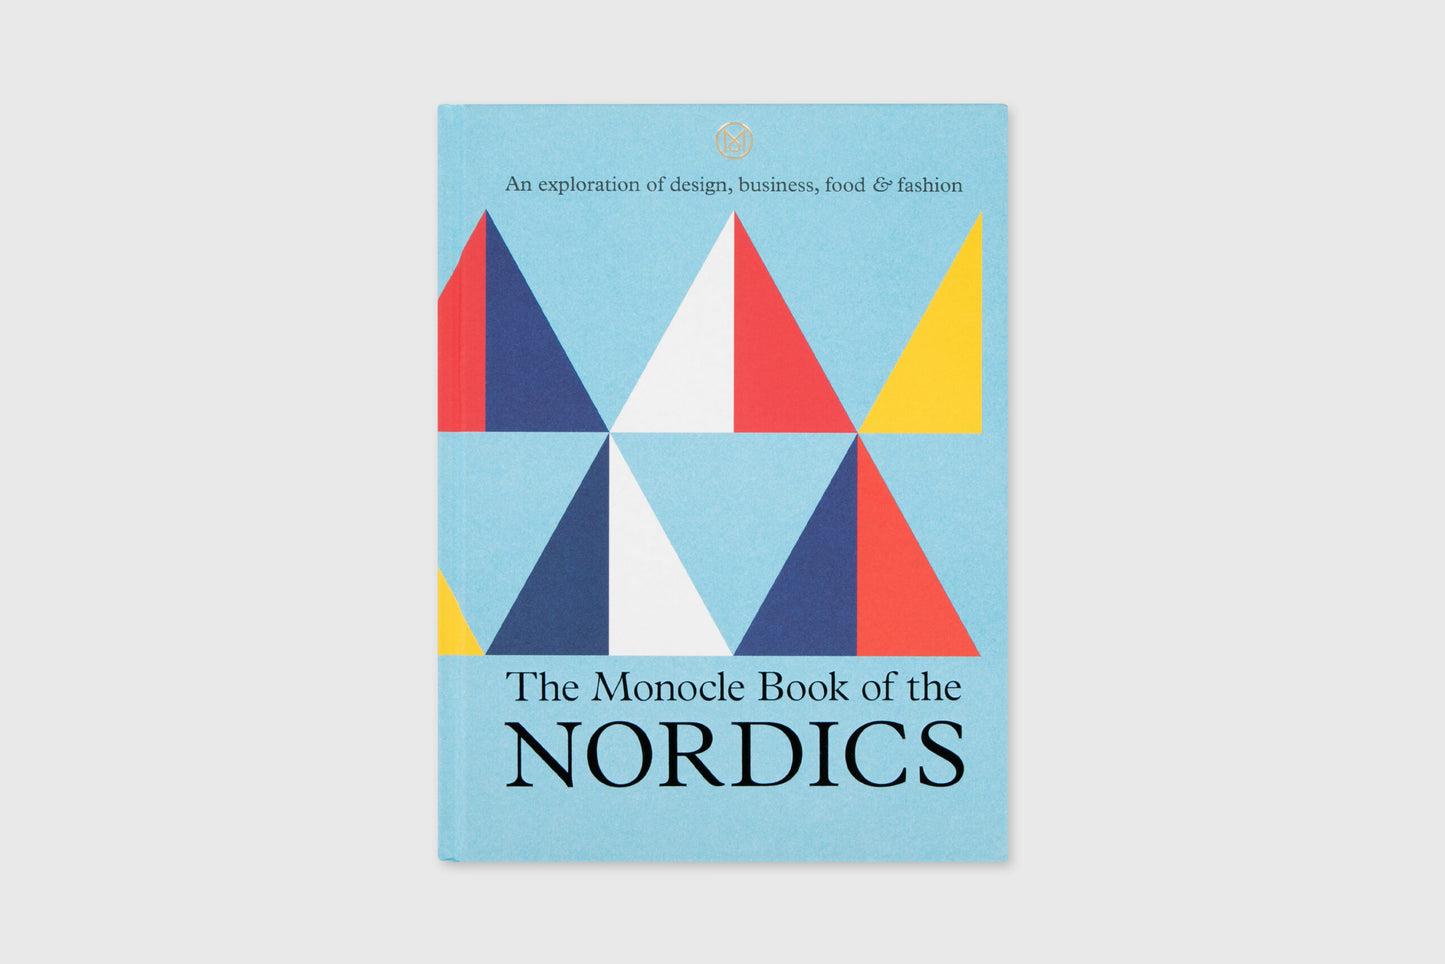 The Monocle Book of the Nordics: An exploration of design, business, food & fashion